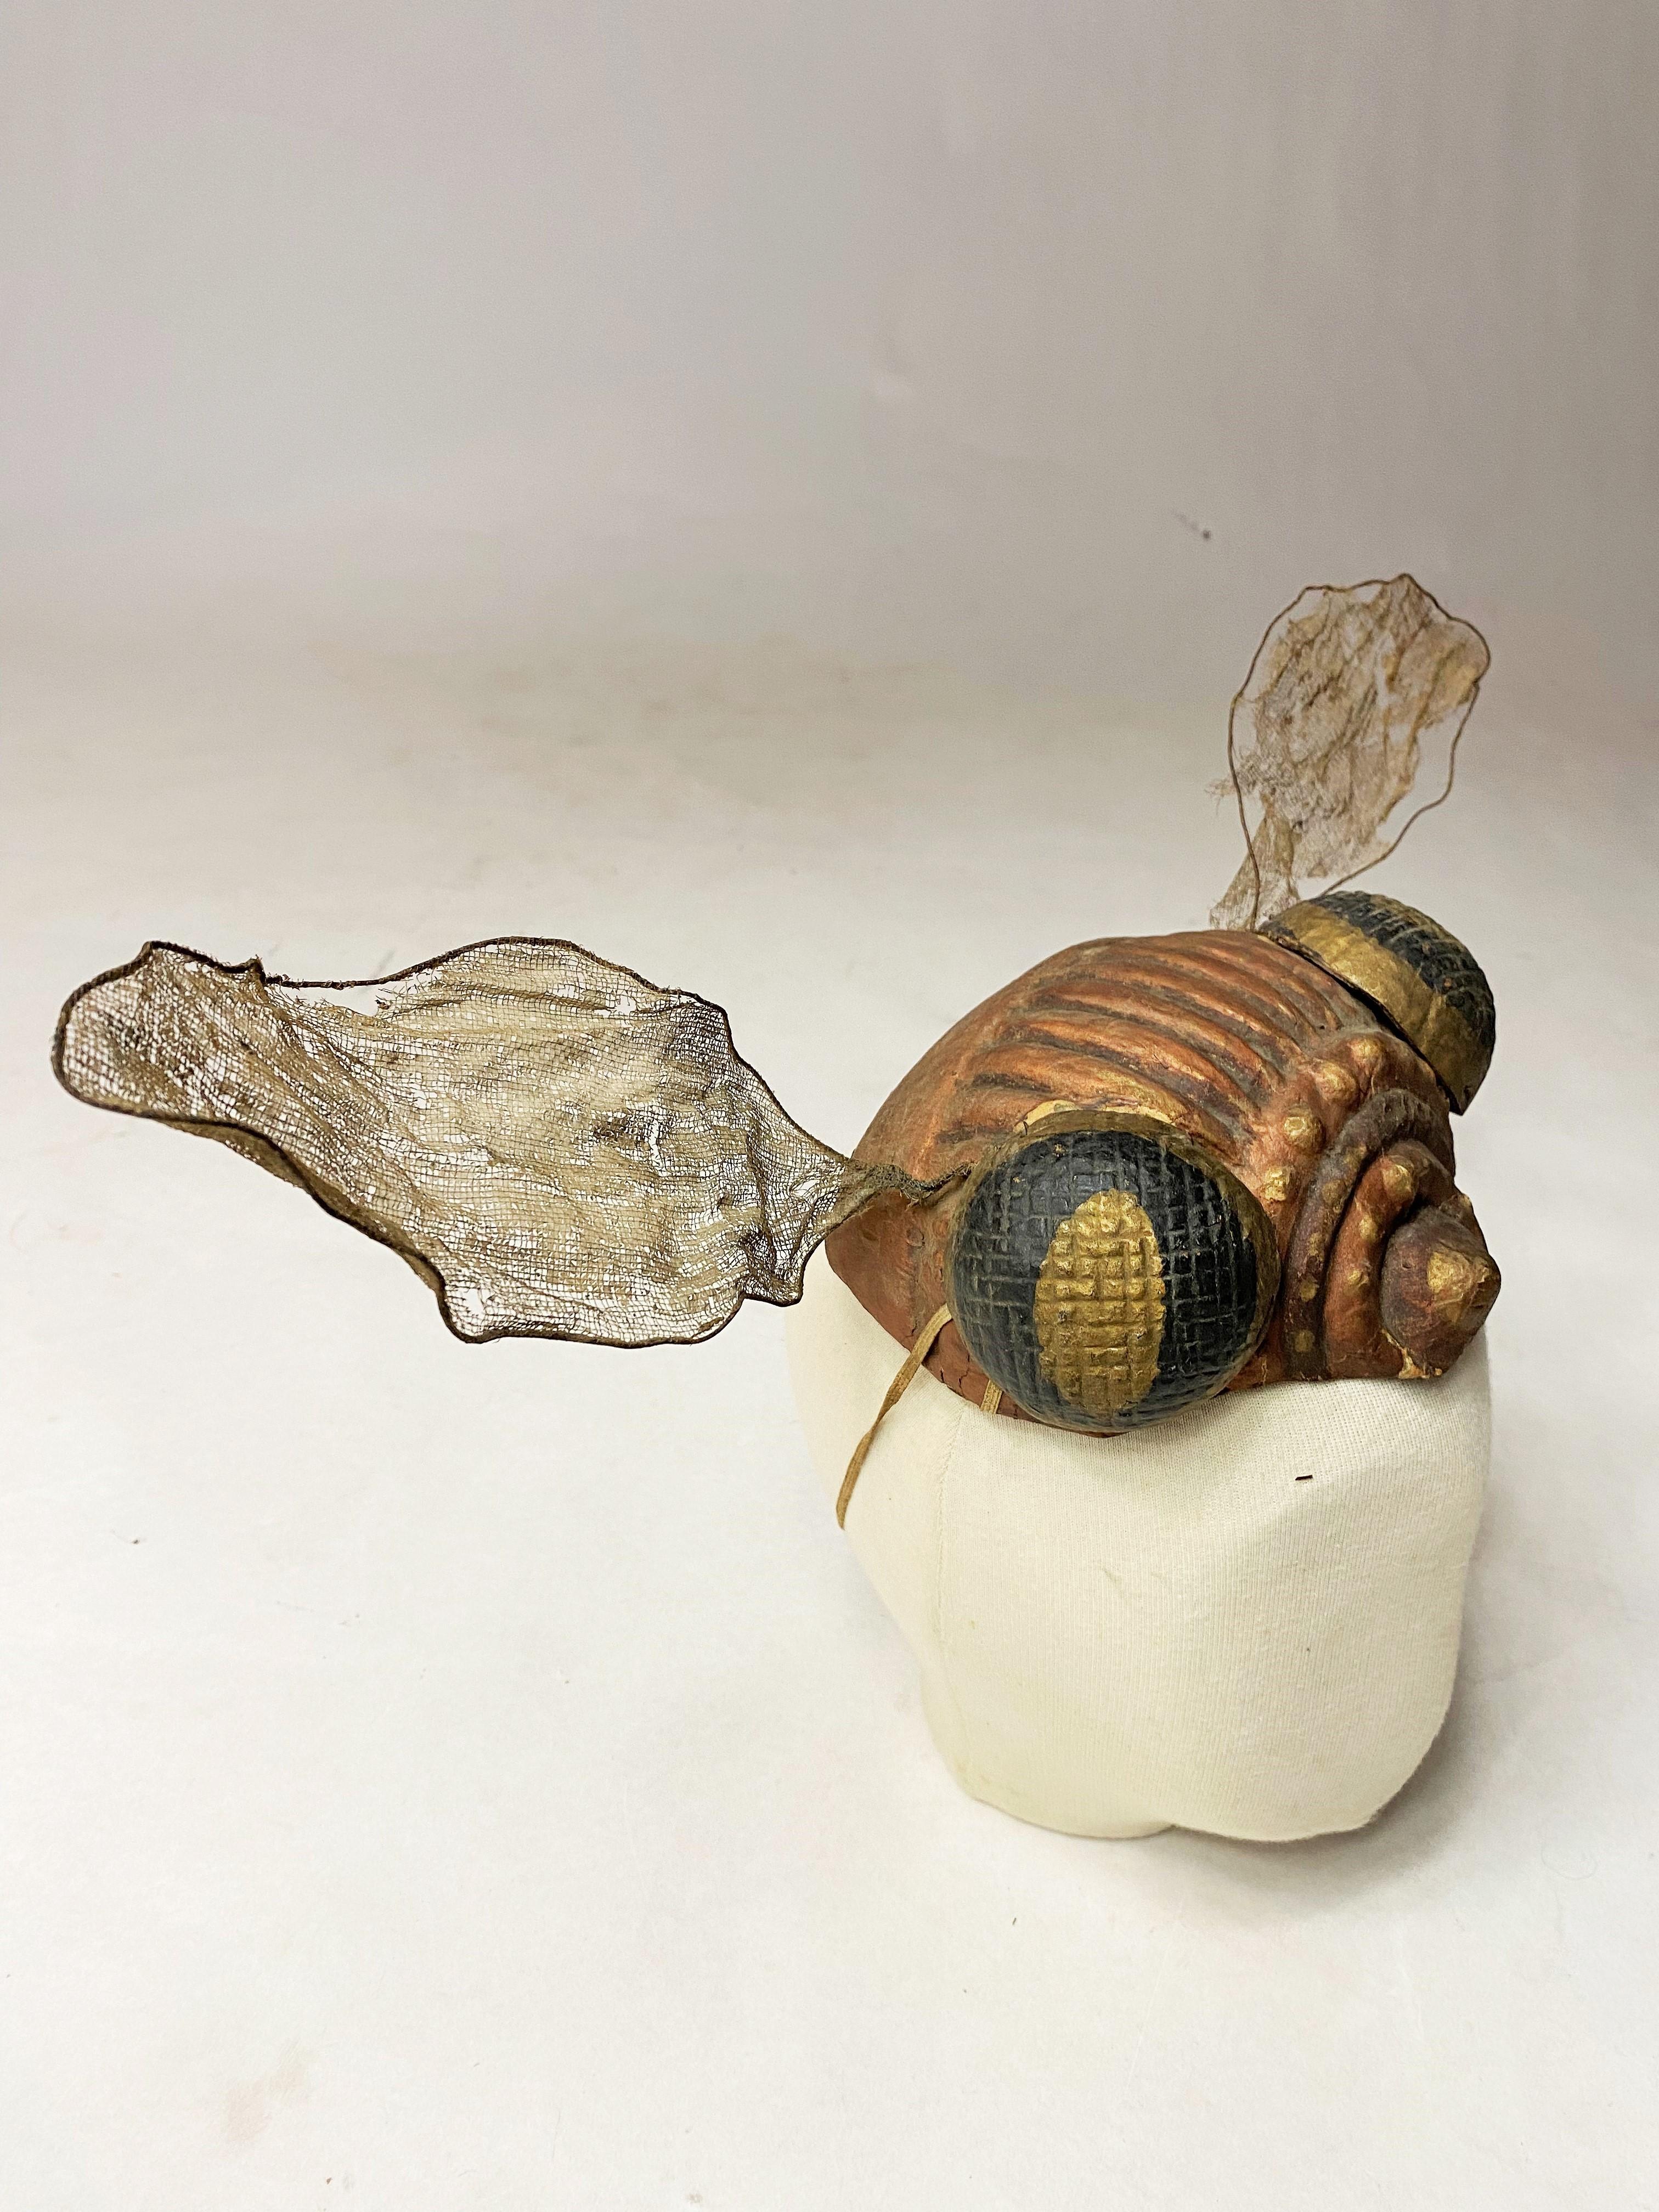 First third of the 20th century
France
A Fancy or Catherinette's Bibi representing a dragonfly head with its wings! Structure in copper, gold and black painted paper mâché, with half-spheres glued on for the eyes. Wings with a wire frame applied